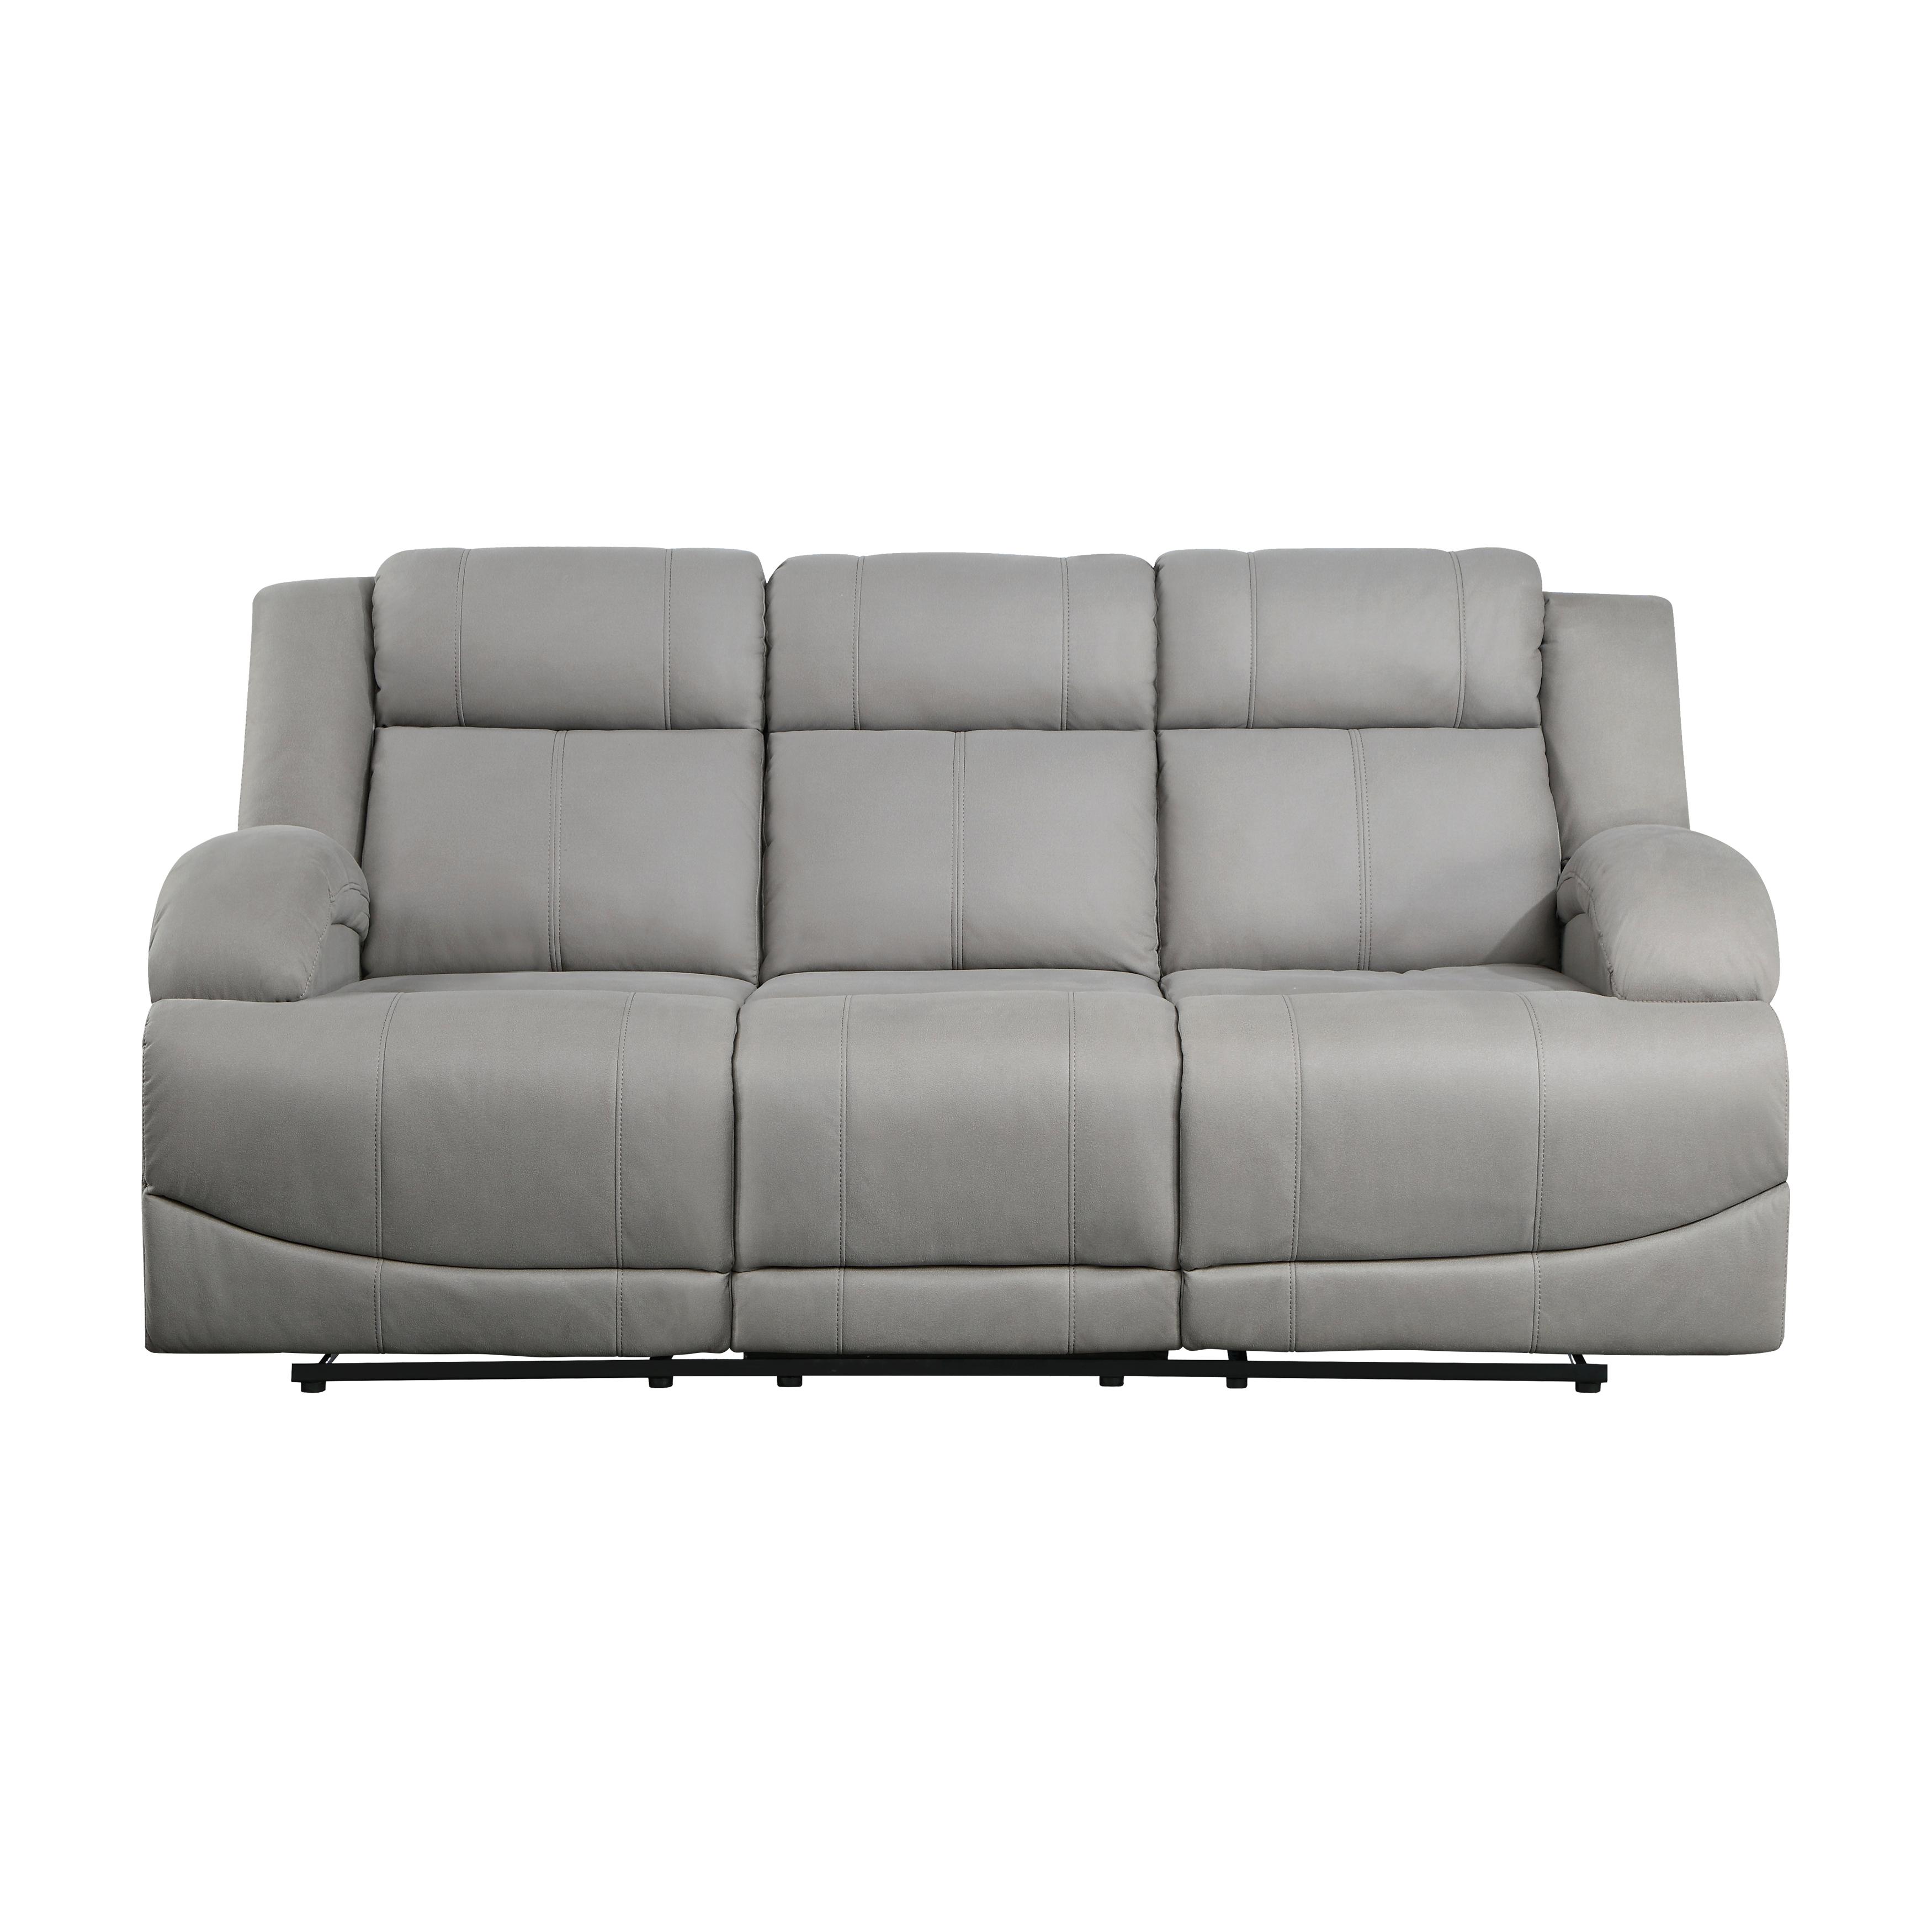 Transitional Reclining Sofa 9207GRY-3 Camryn 9207GRY-3 in Gray Microfiber